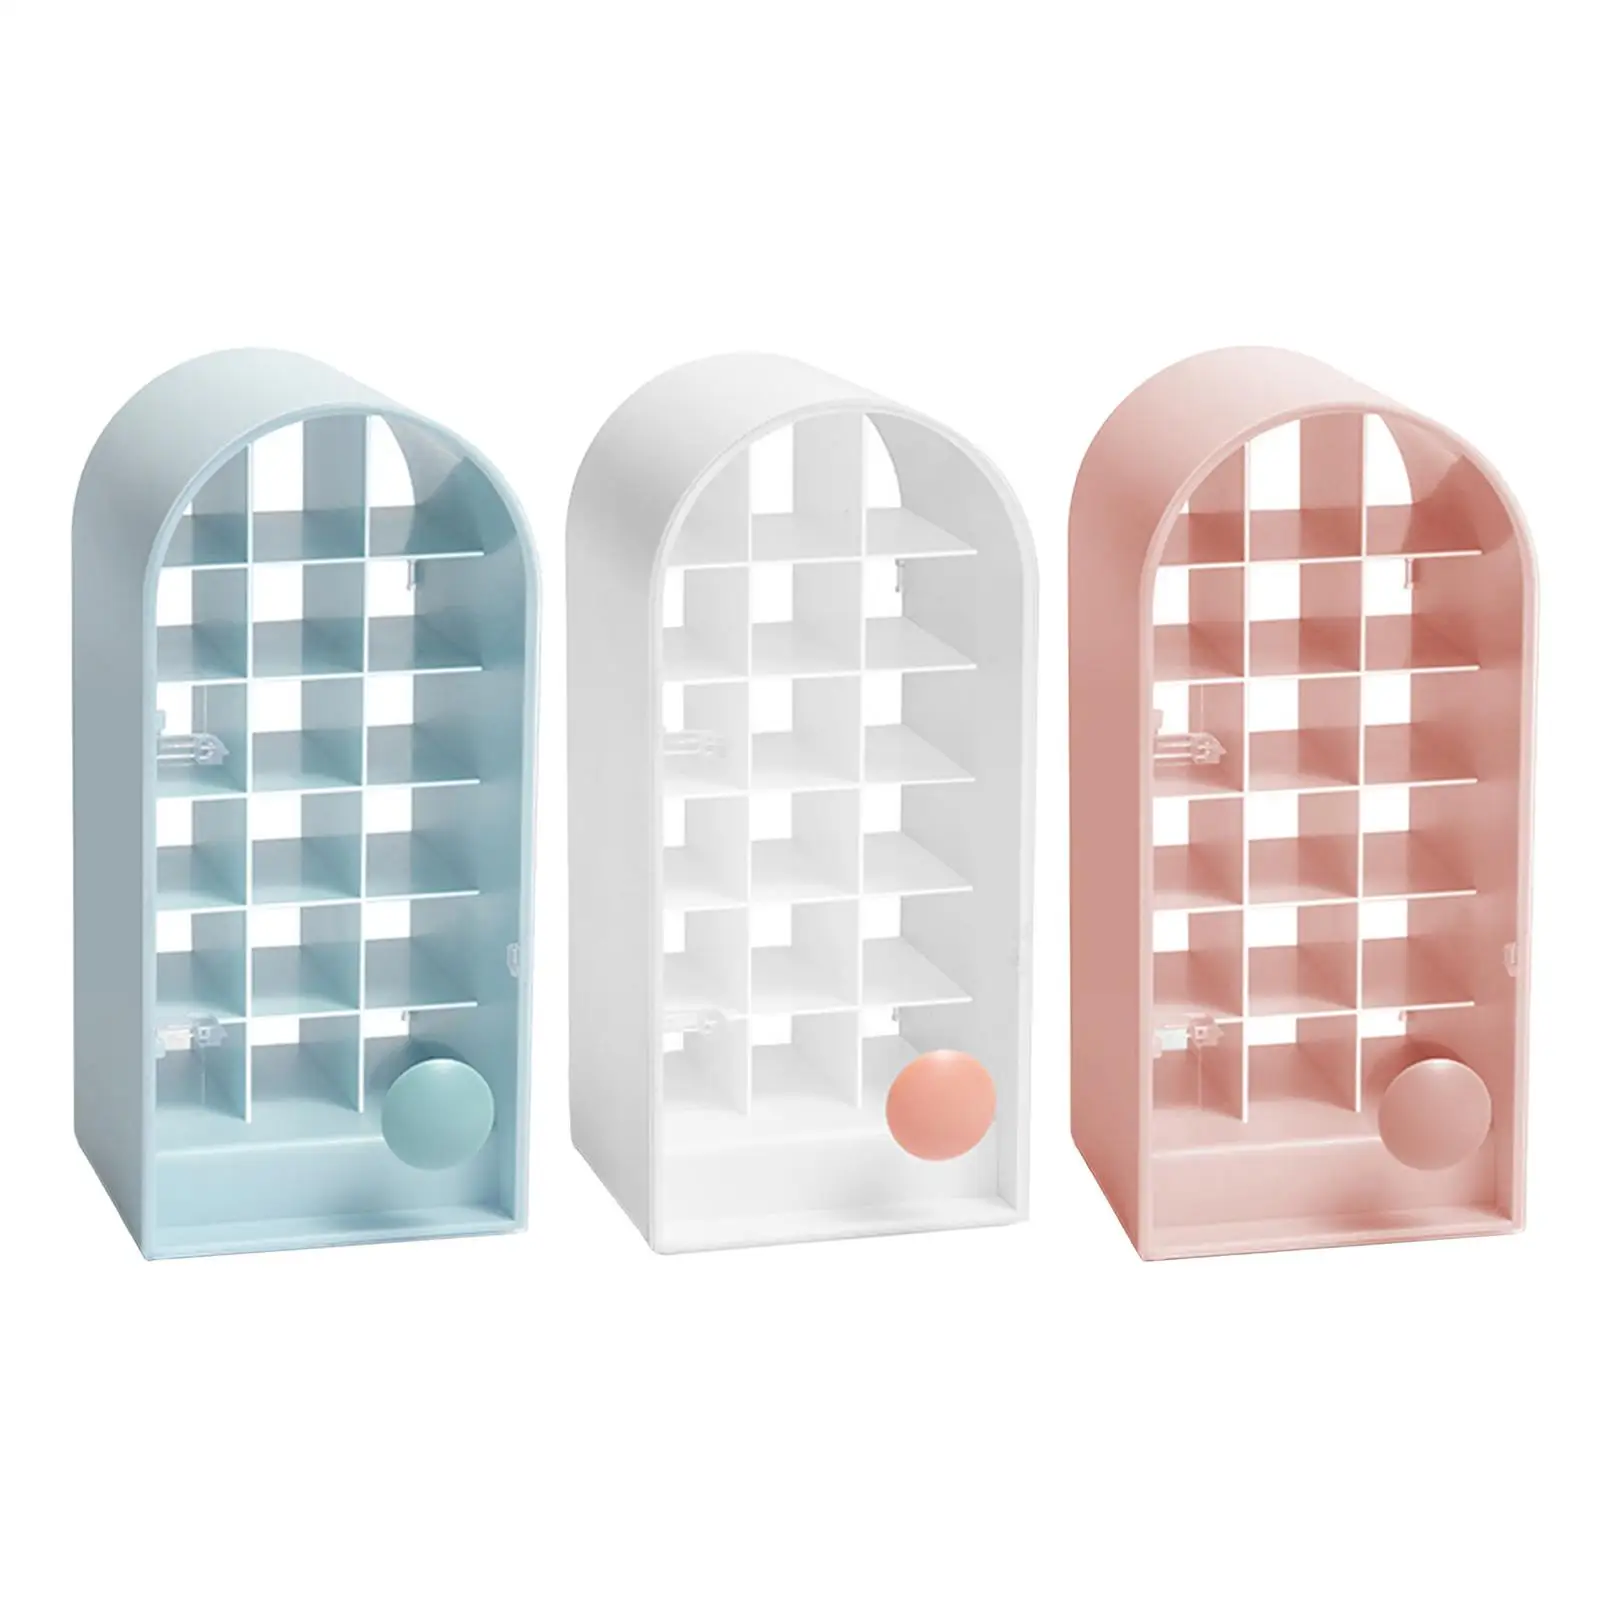 18 Spaces Lipstick Holder Storage Stand Decoration for Dresser Countertop Display Stand for Lip Glosses Lipsticks